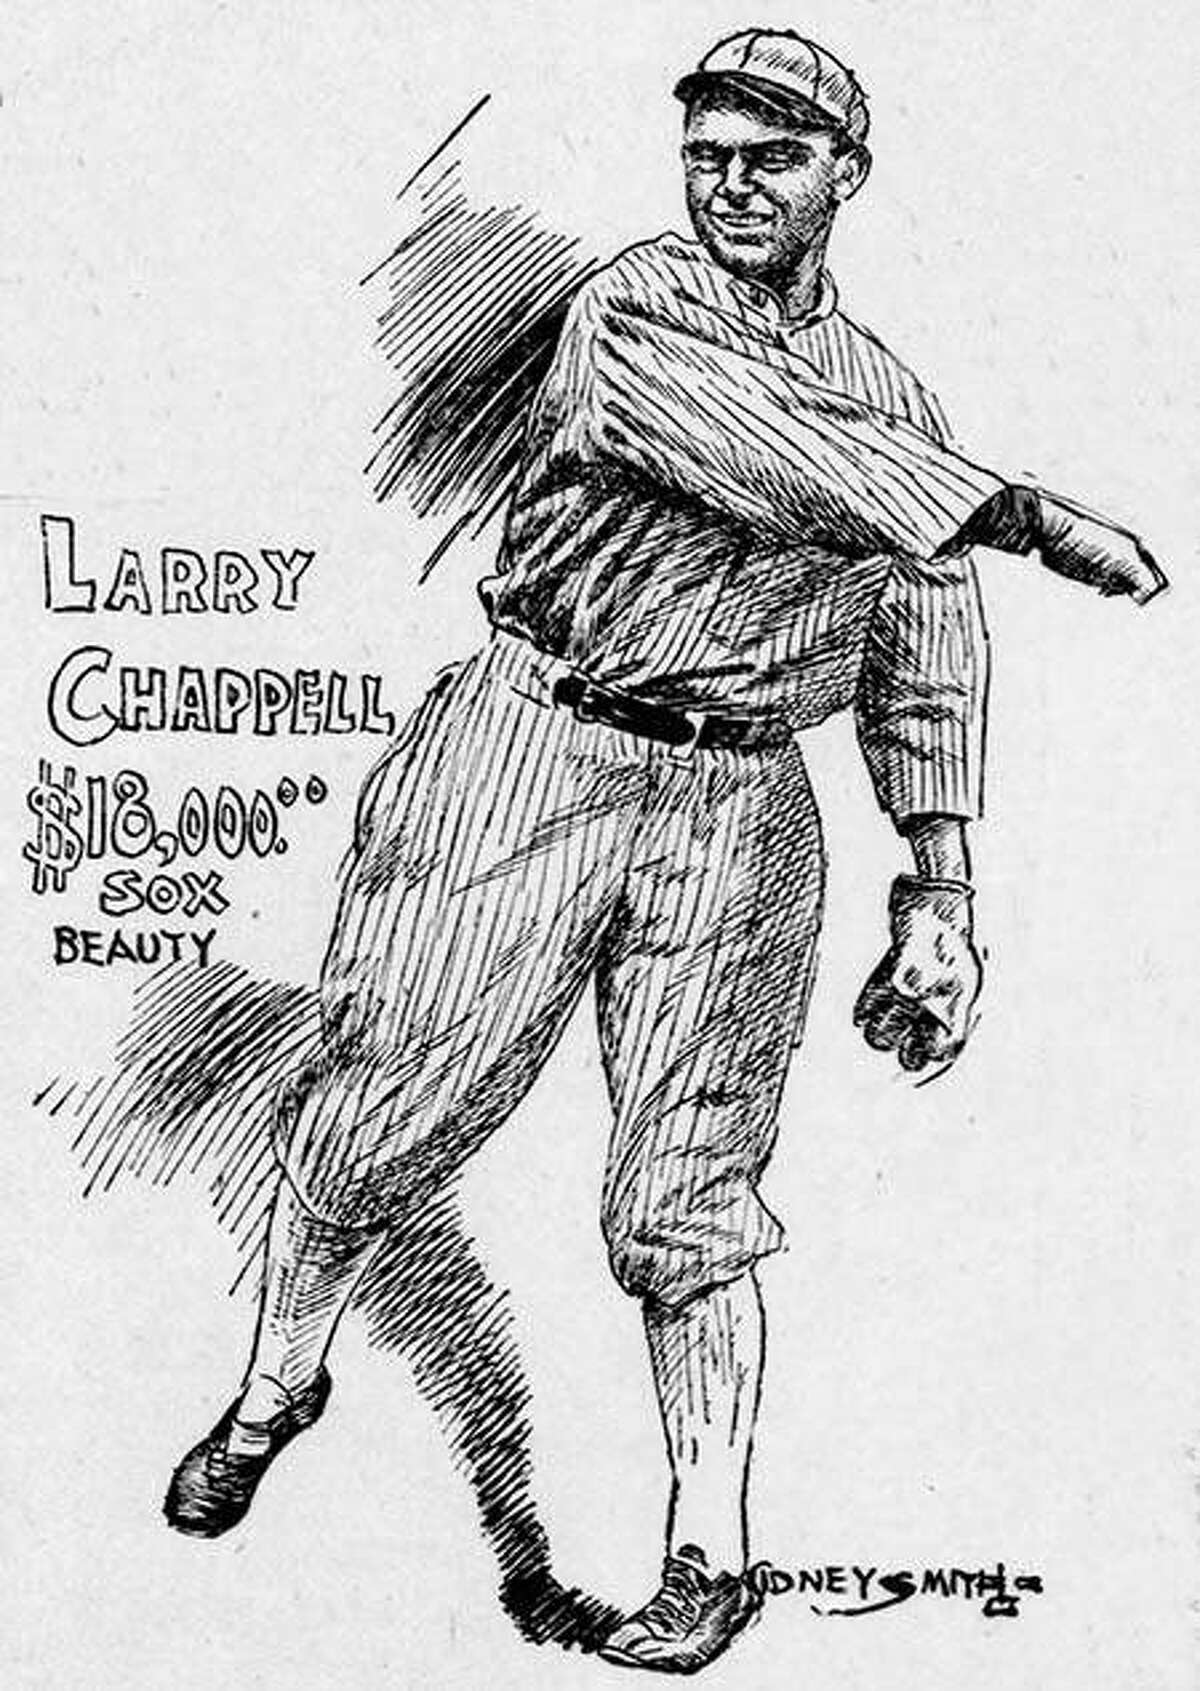 Jersey County native Laverne “Larry” Chappell is shown playing as a Chicago White Sox after becoming the most expensive outfield in baseball history in 1913.